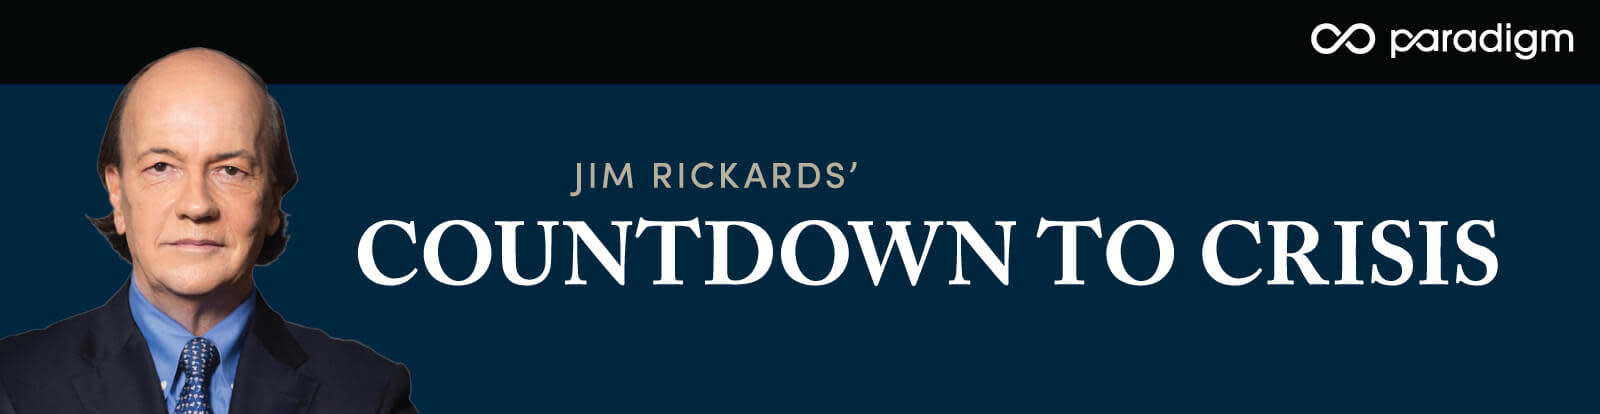 Countdown to Crisis with Jim Rickards